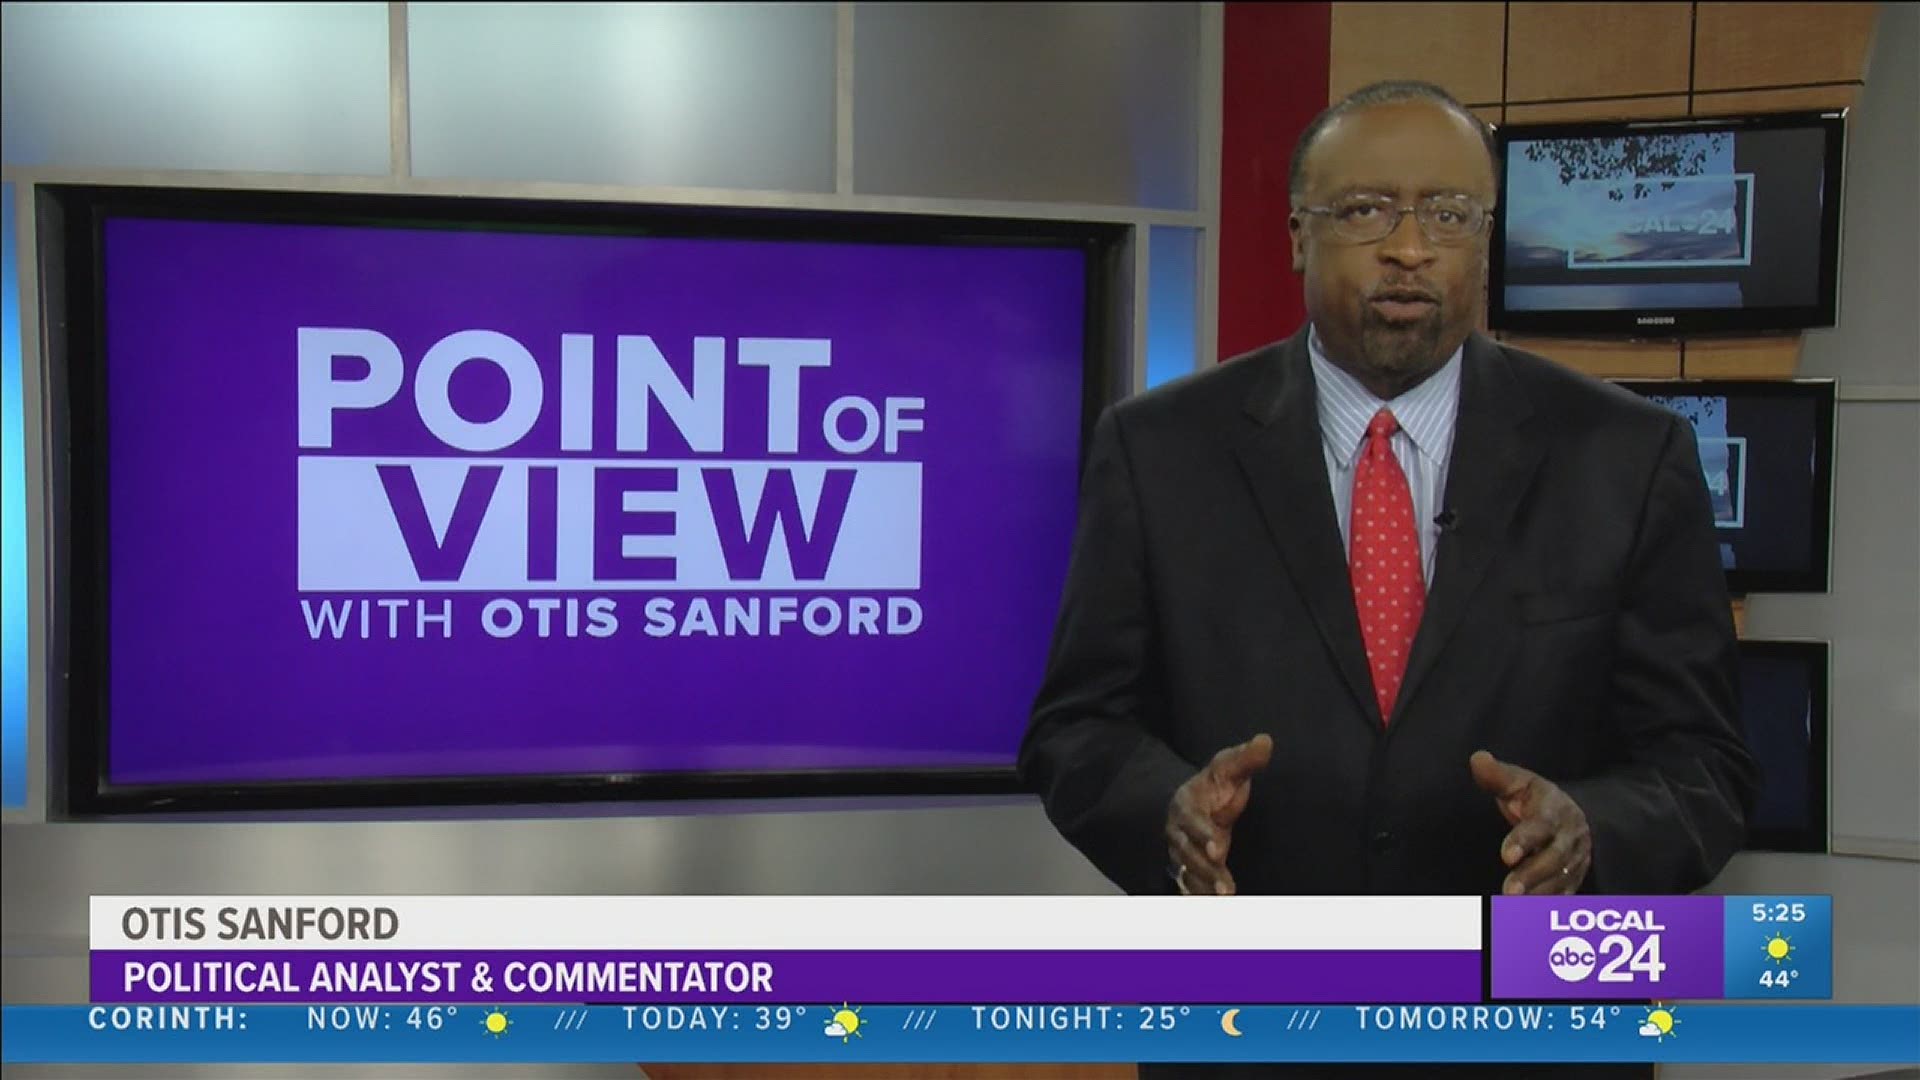 Local 24 news political analyst and commentator Otis Sanford shares his point of view on John DeBerry’s appointment to Tennessee Gov. Bill Lee’s cabinet.